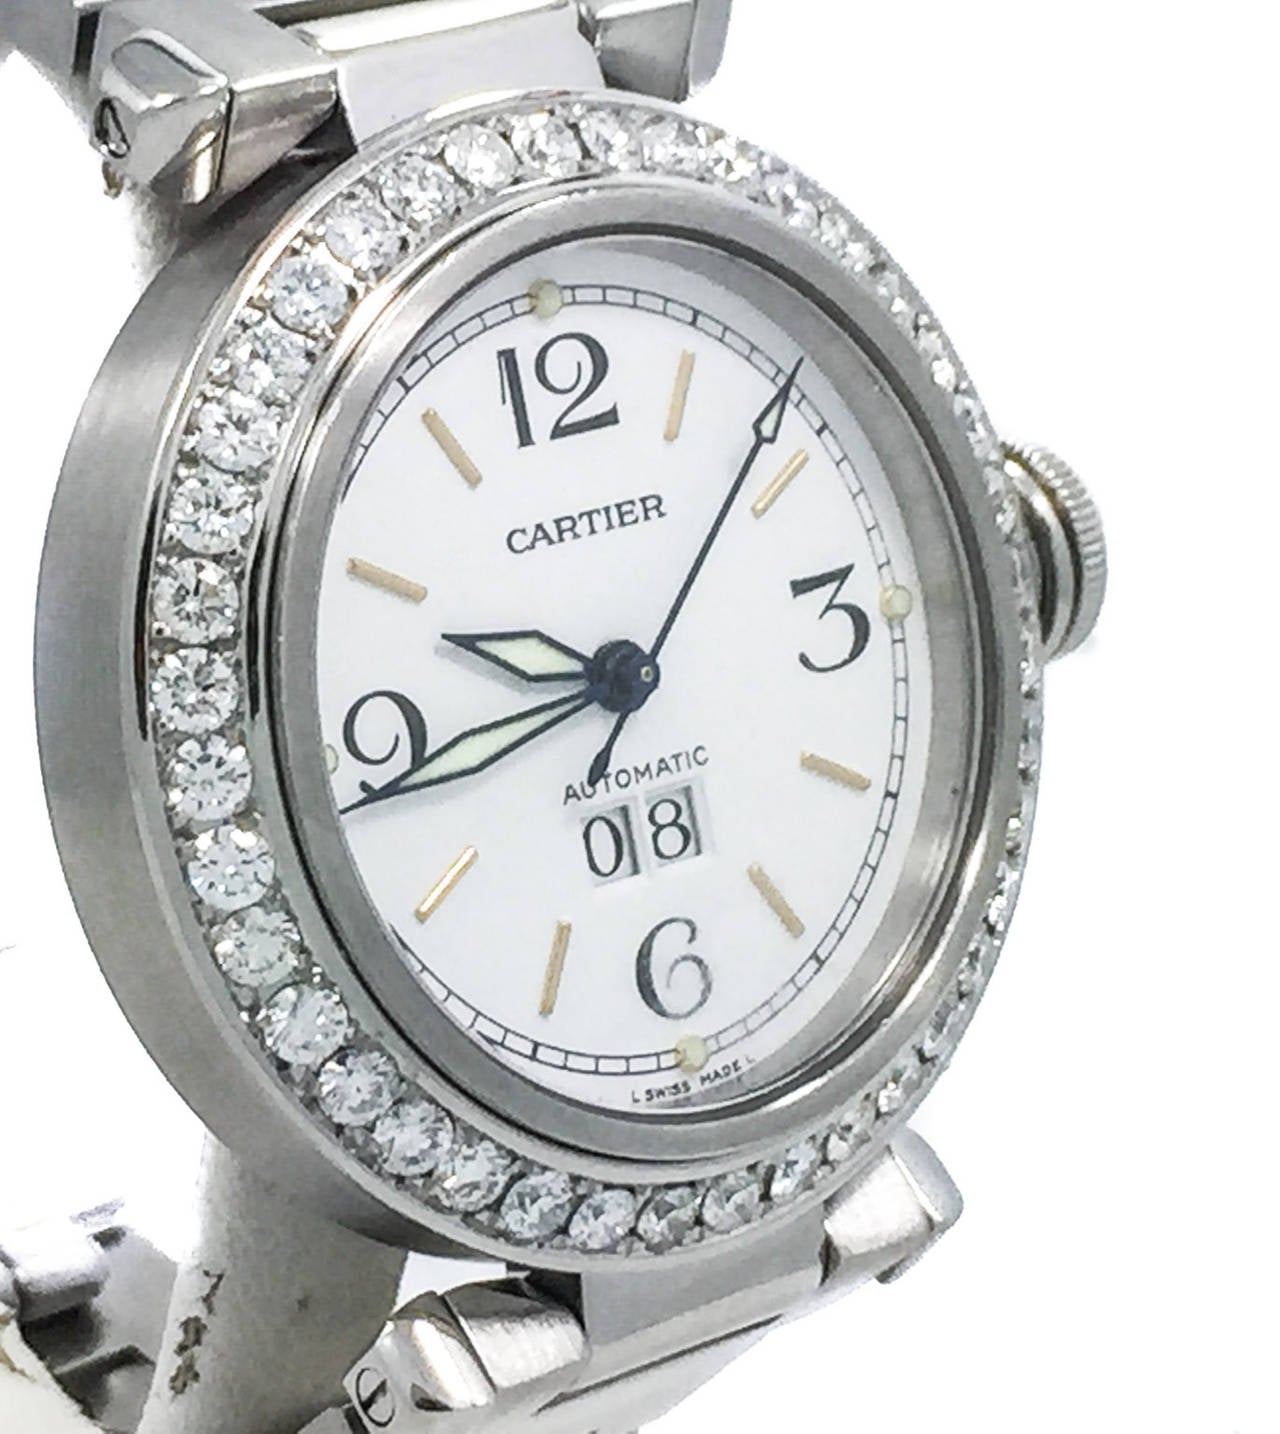 Cartier Ladies 35mm Pasha Big Date in Stainless Steel W/ Very High Quality Diamond Bezel.  The Watch is in Excellent Condition & Keeping Great Time, Movement is Powered by Automatic Mechanical Winding. No Box or Papers. The Watch Bracelet fits up to